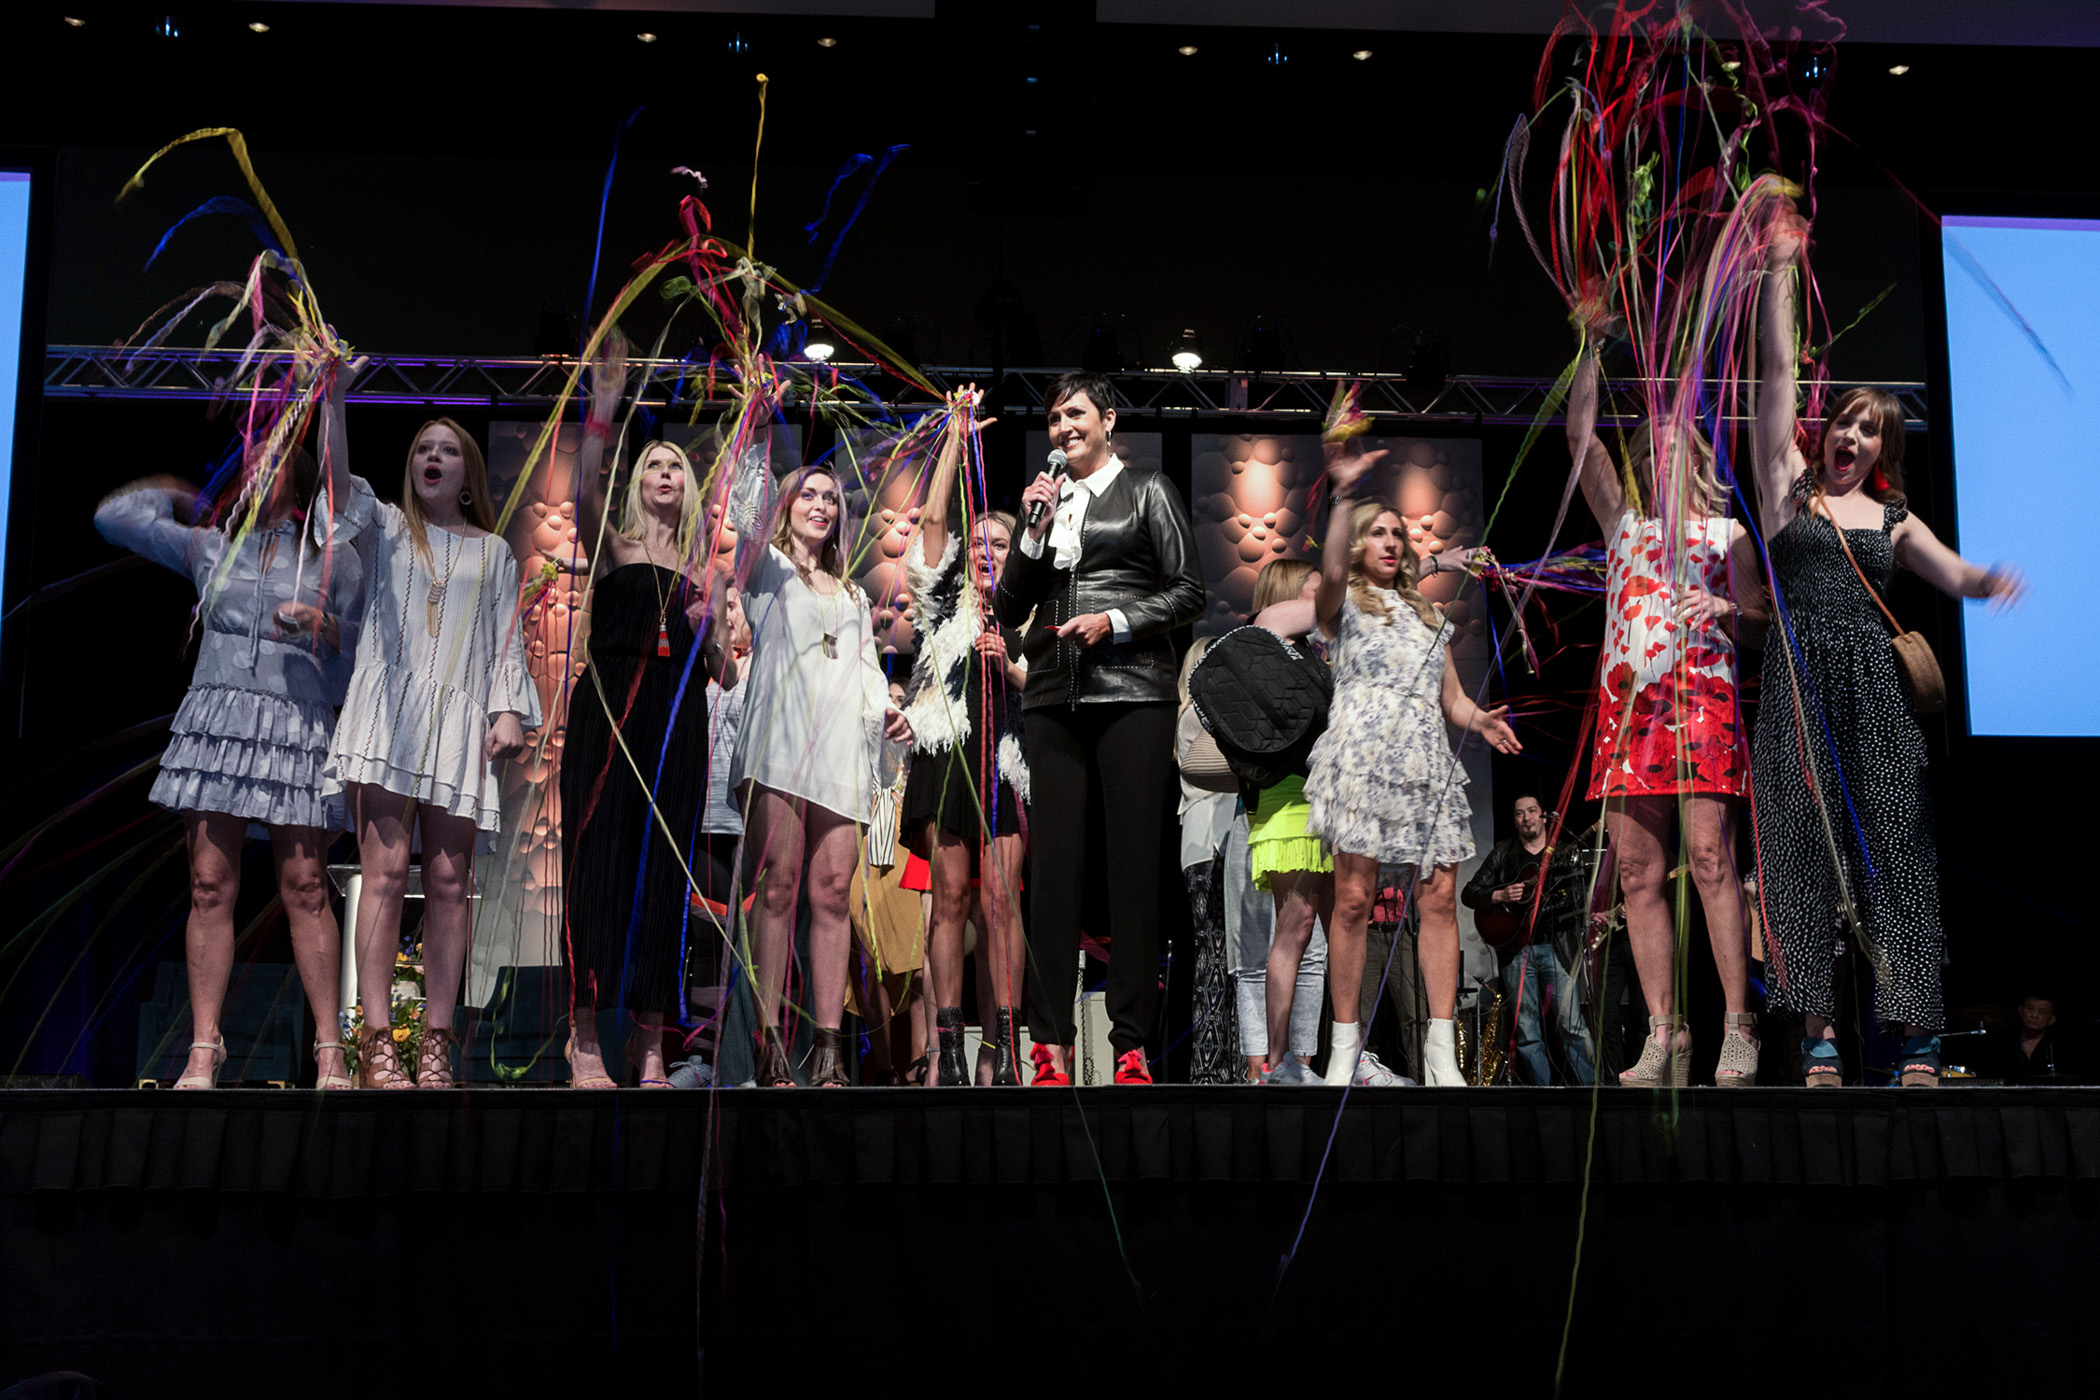 Guests on stage at Books and Boutiques celebrating by throwing streamers while raising funds for Saint Luke's Rehabilitation Institute